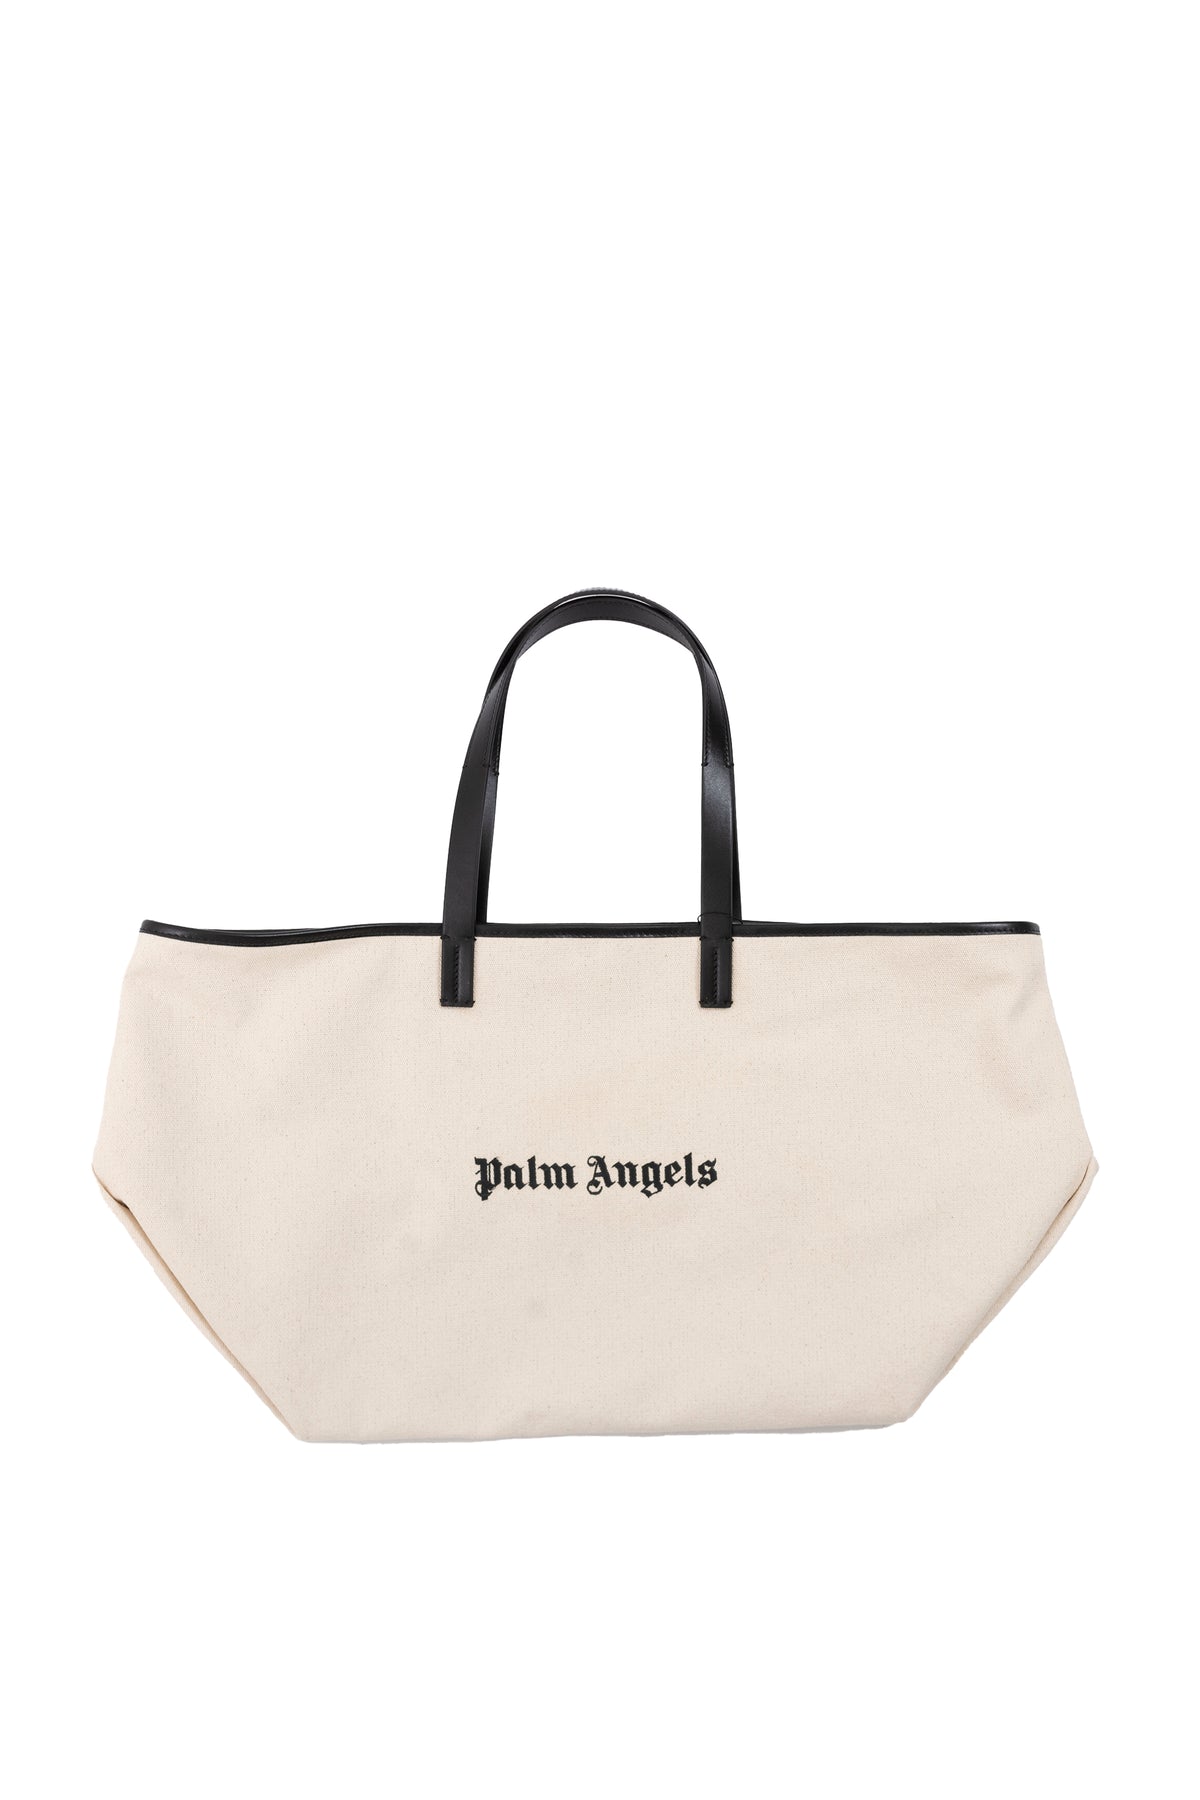 CLASSIC LOGO BASIC TOTE / OFFWHT BLK